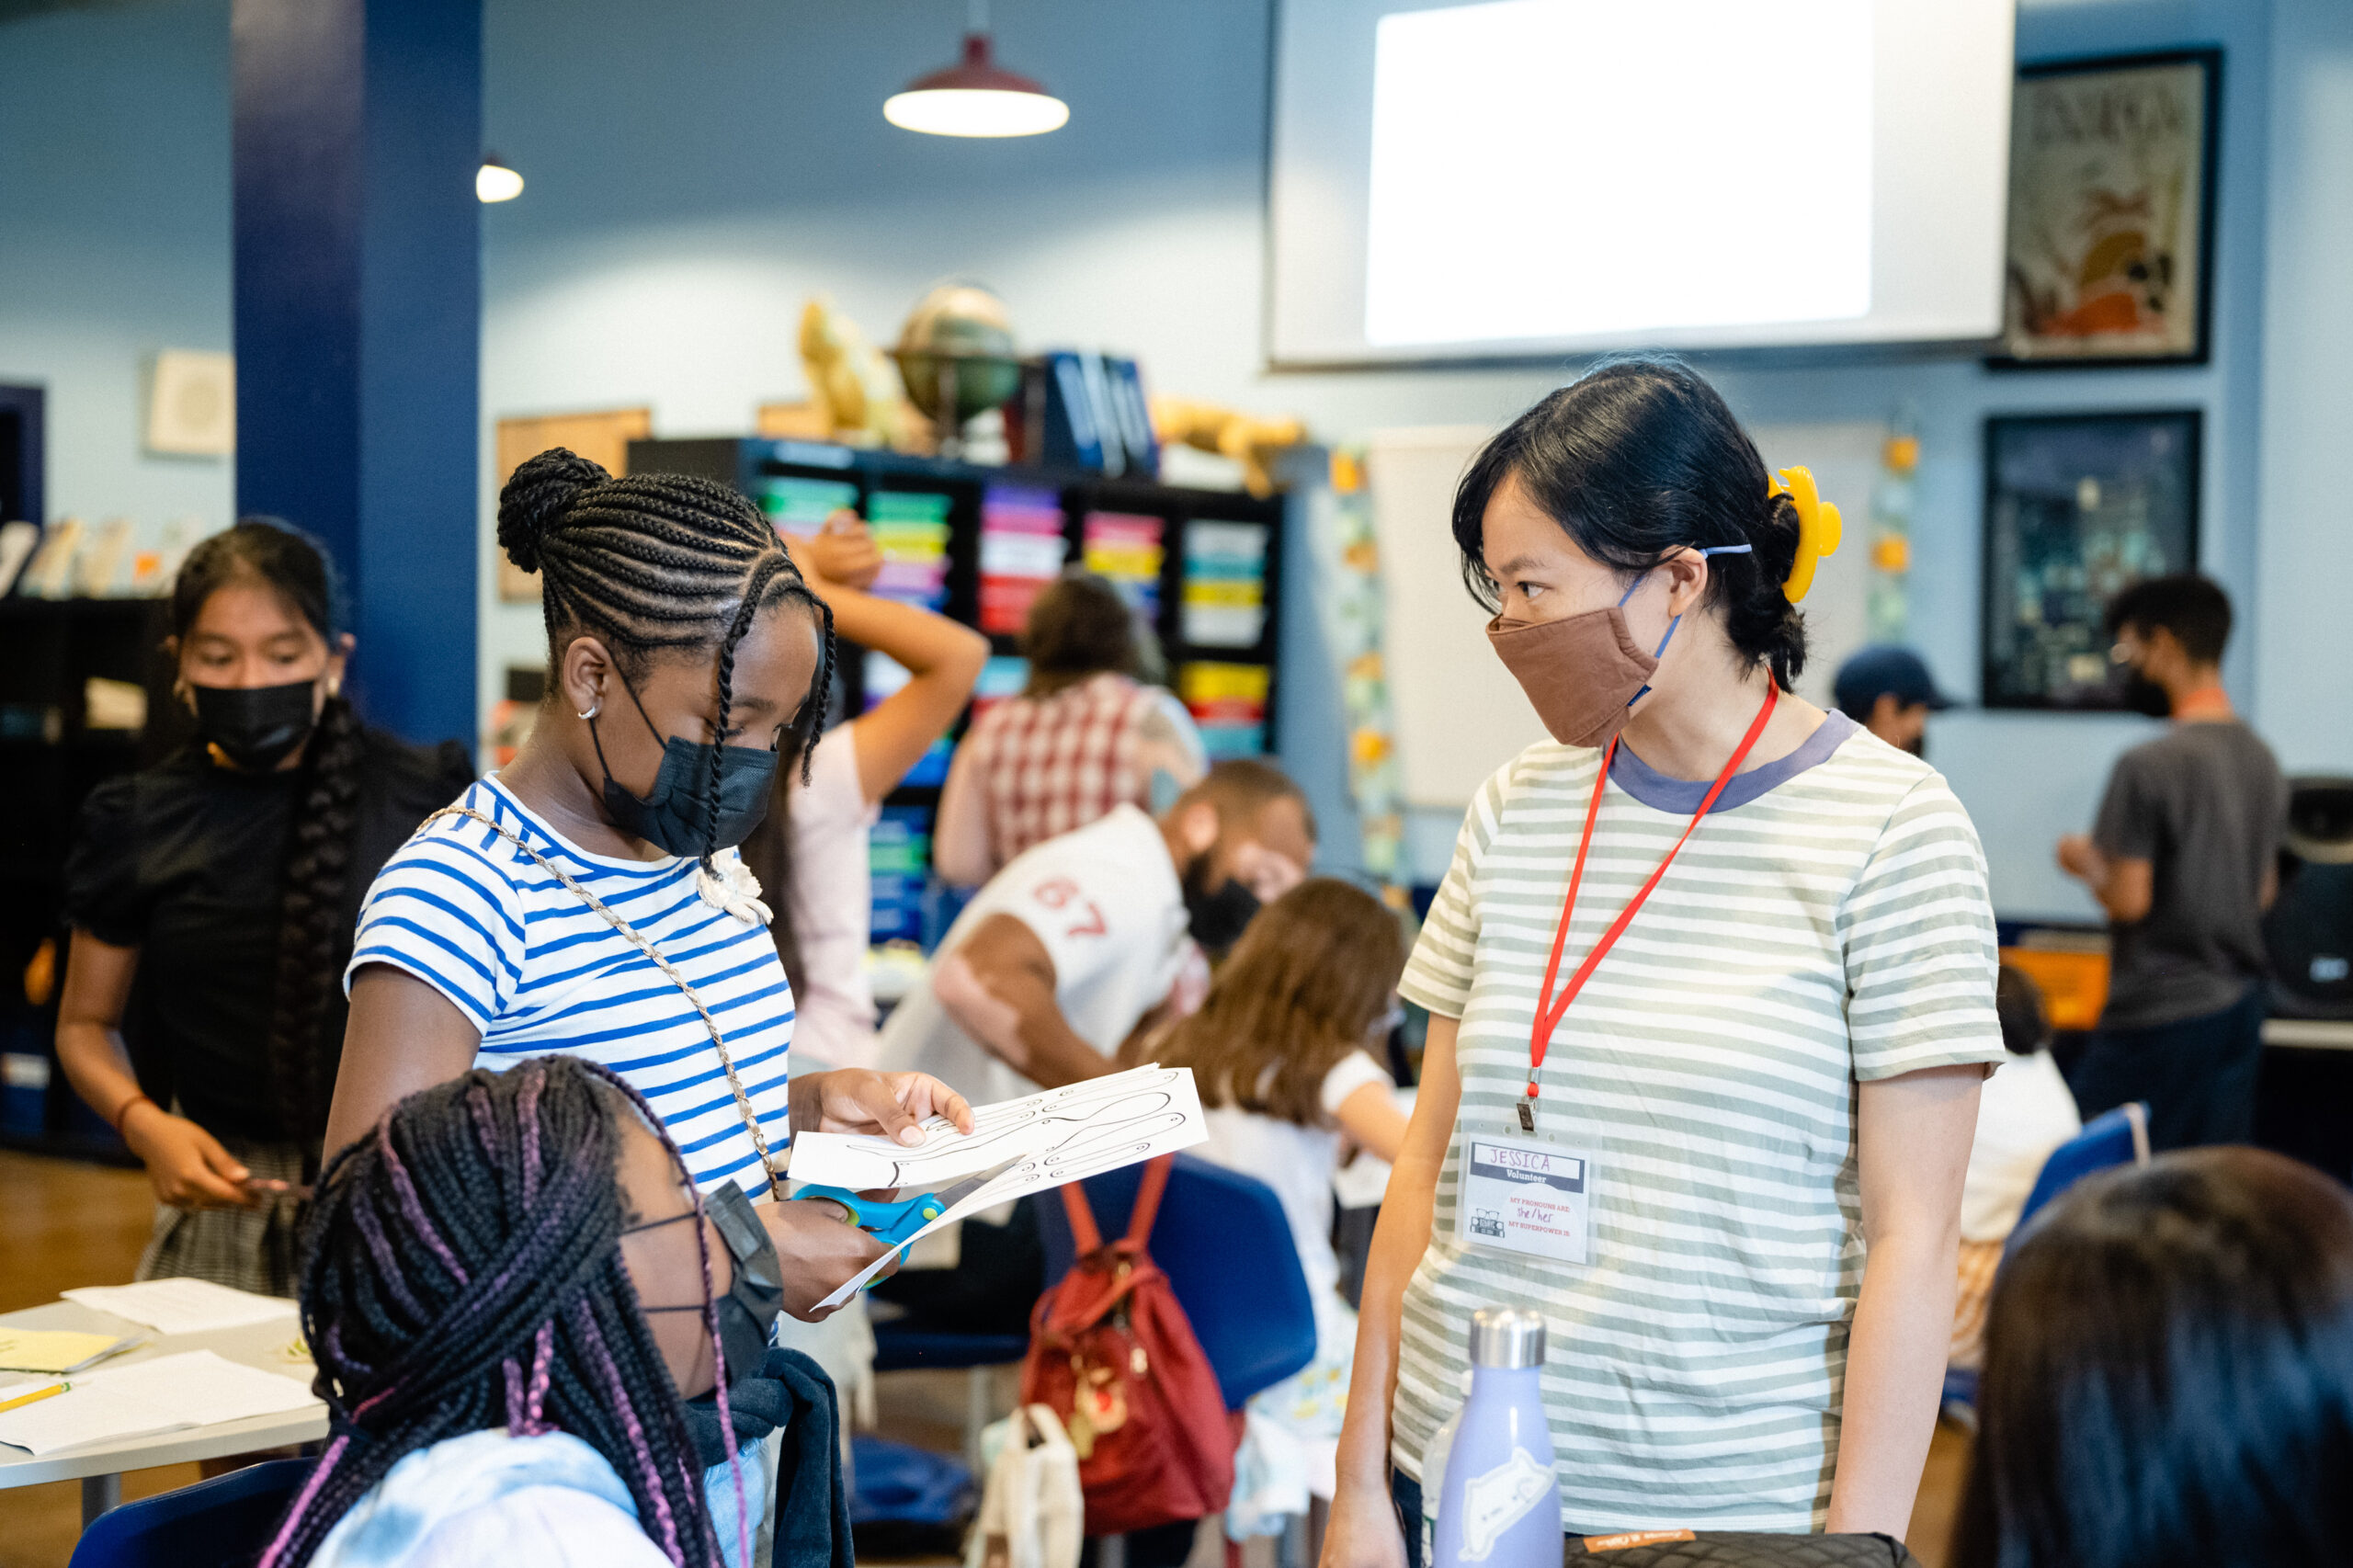 An 826NYC volunteer with a happy young author at our youth writing center. Both the volunteer and student are standing and other young authors and adult volunteers are visible in the foreground and background.